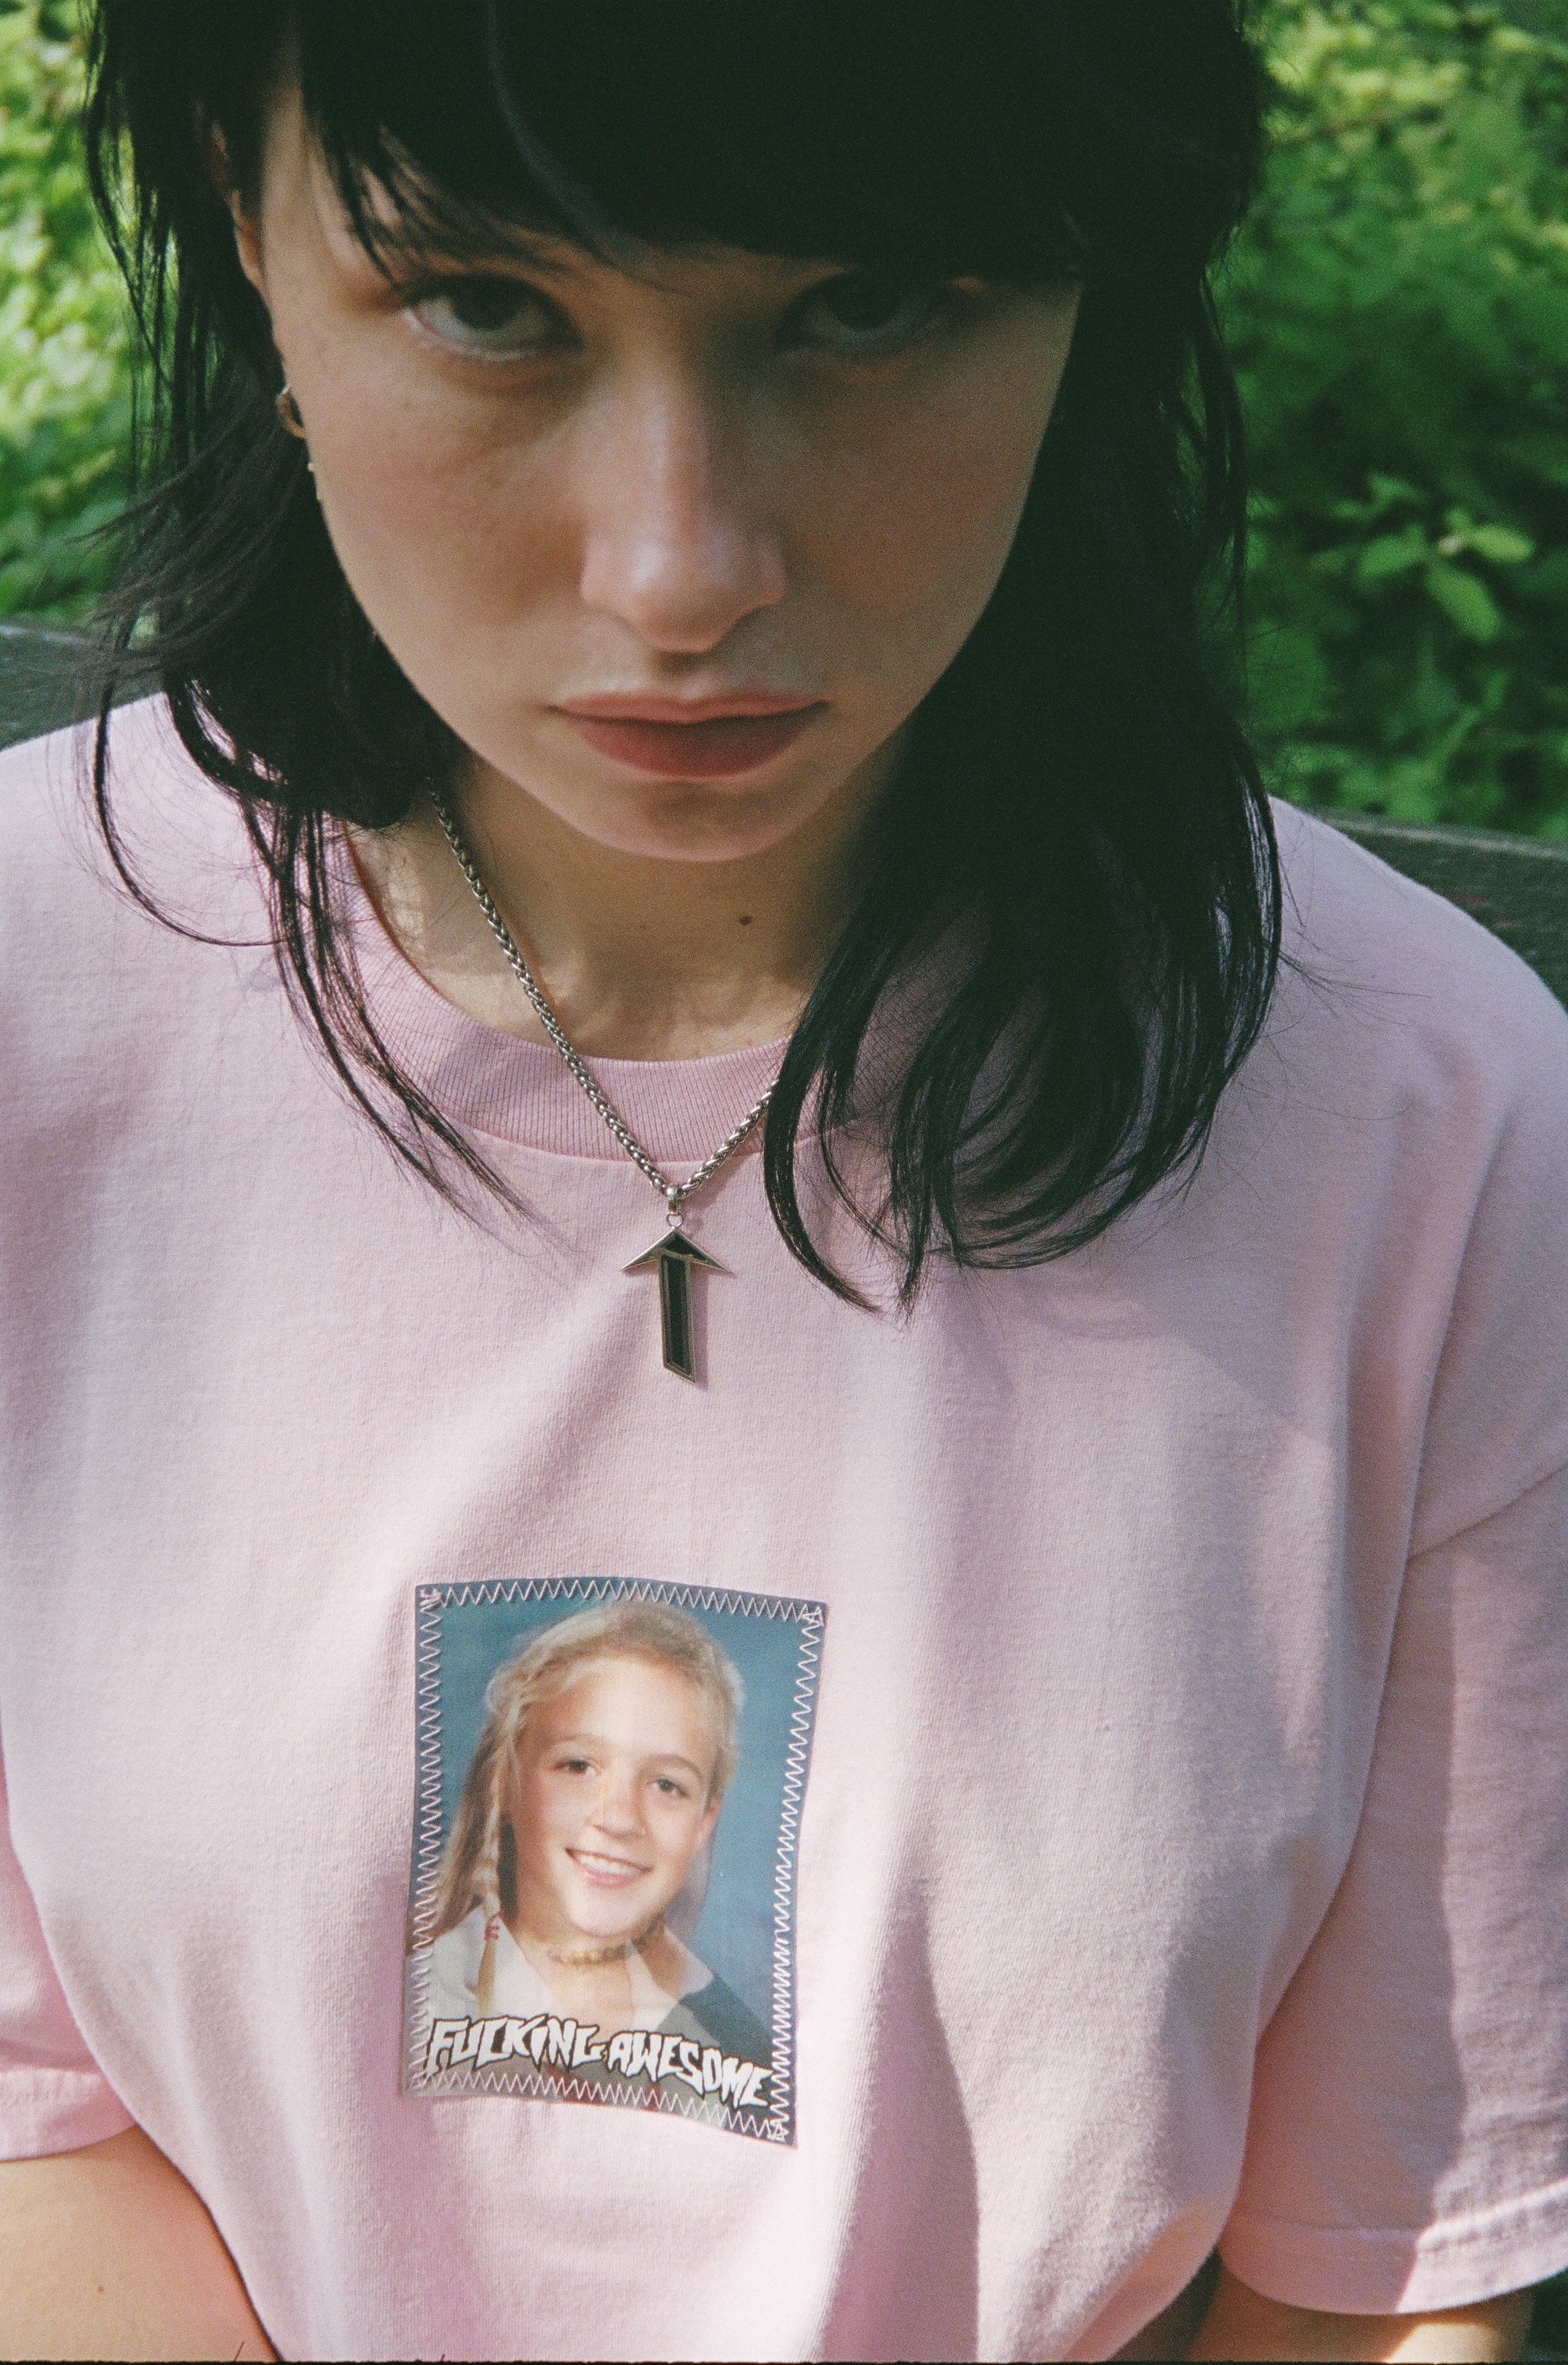 Fucking Awesome's first womenswear collection, designed by Chloë Sevigny